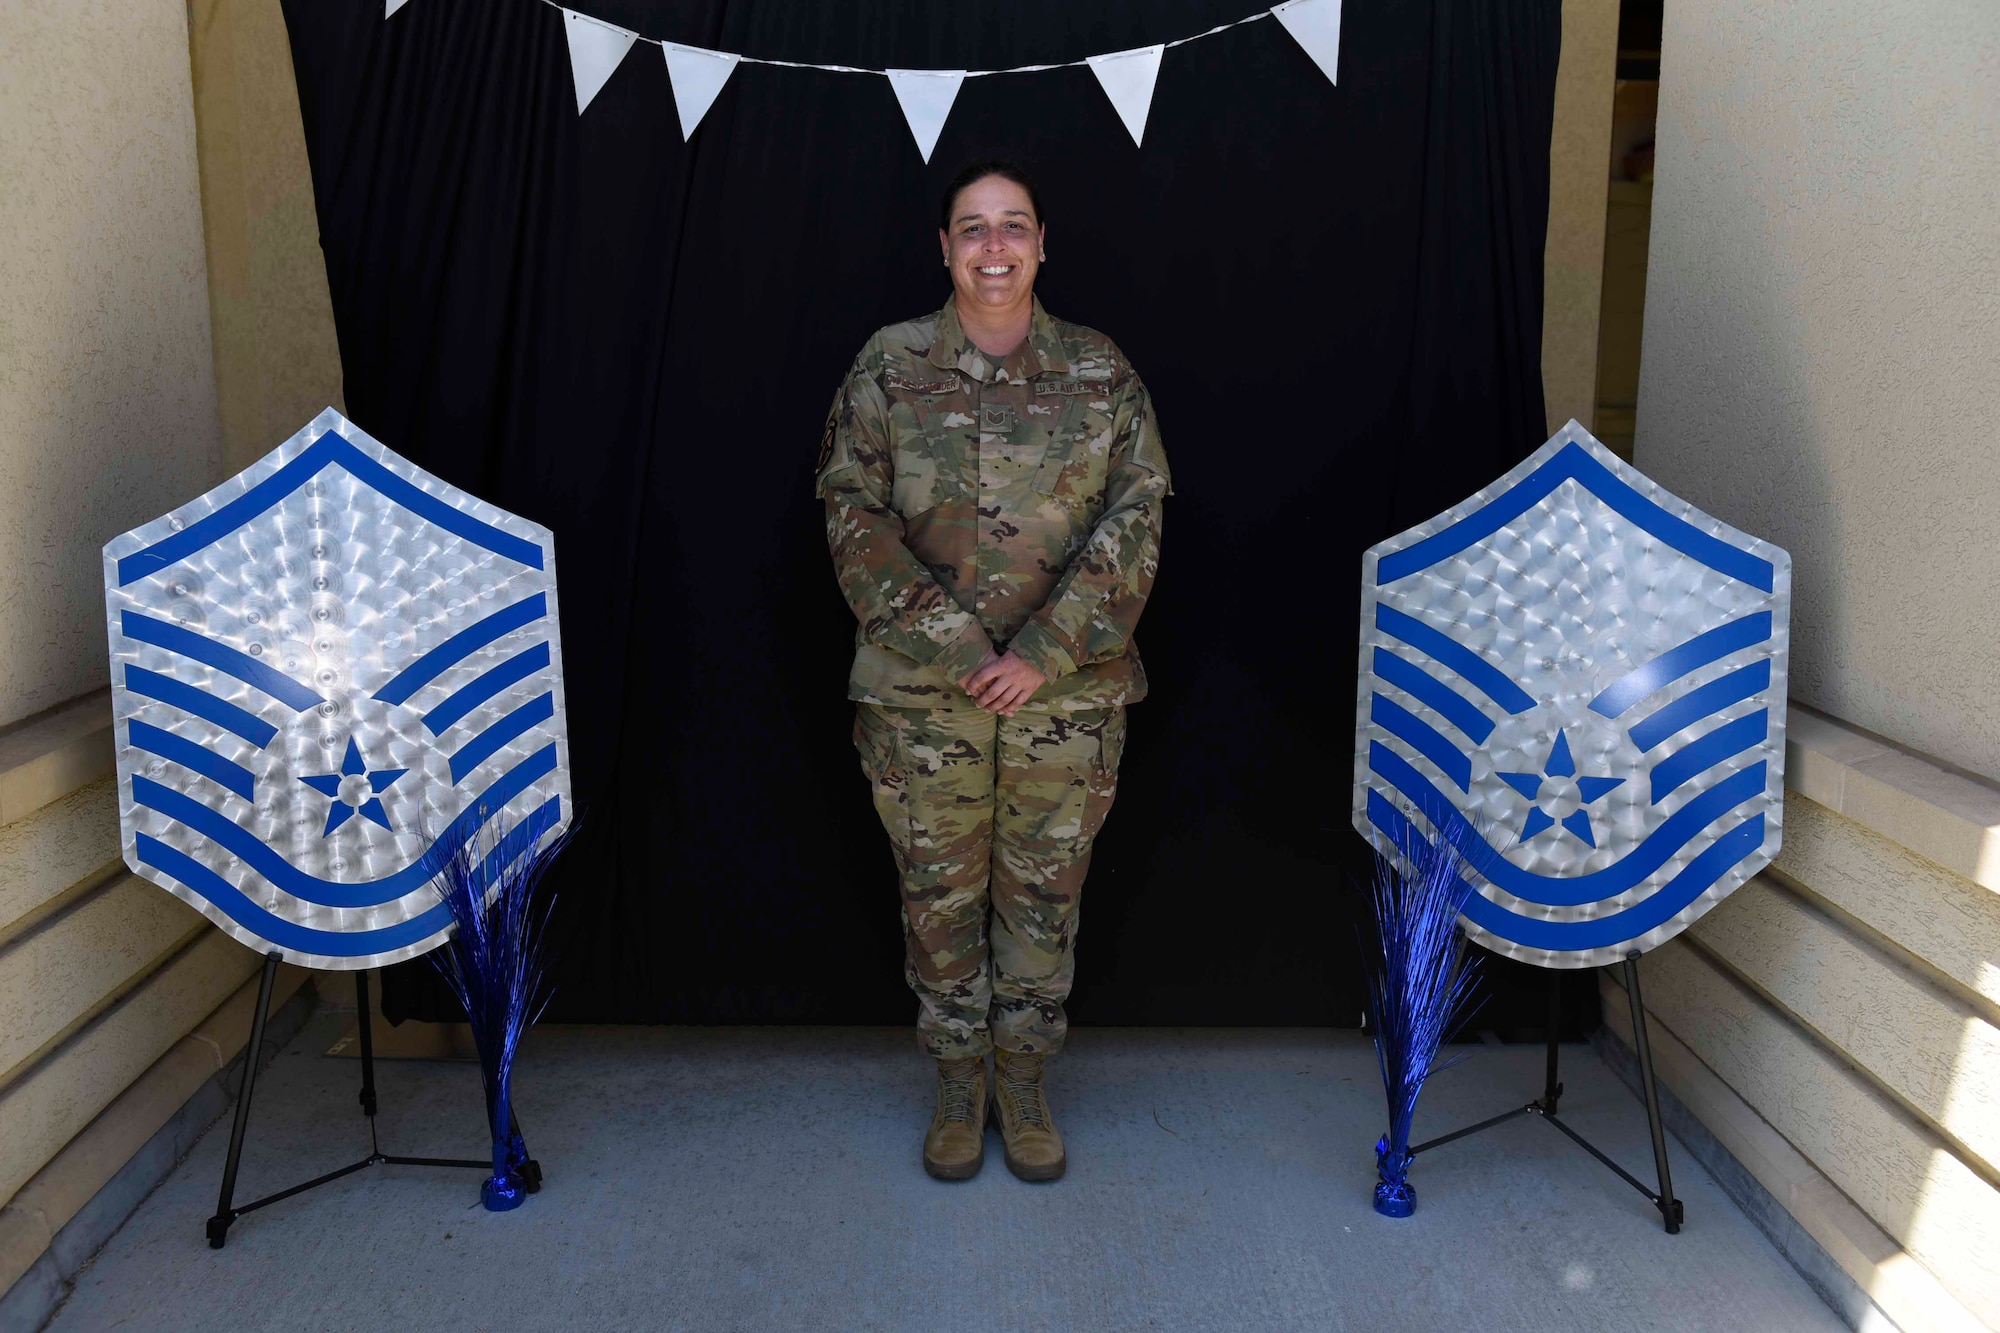 U.S. Air Force Tech. Sgt. Kari Pohlschneider, 60th Operations Support Squadron superintendent of wing intelligence, stands in a photo booth during a master sergeant release celebration July 23, 2020, at Travis Air Force Base, California. The event coordinators created a photo booth for master sergeant selects and their families to take photos. (U.S. Air Force photo by Airman 1st Class Cameron Otte)